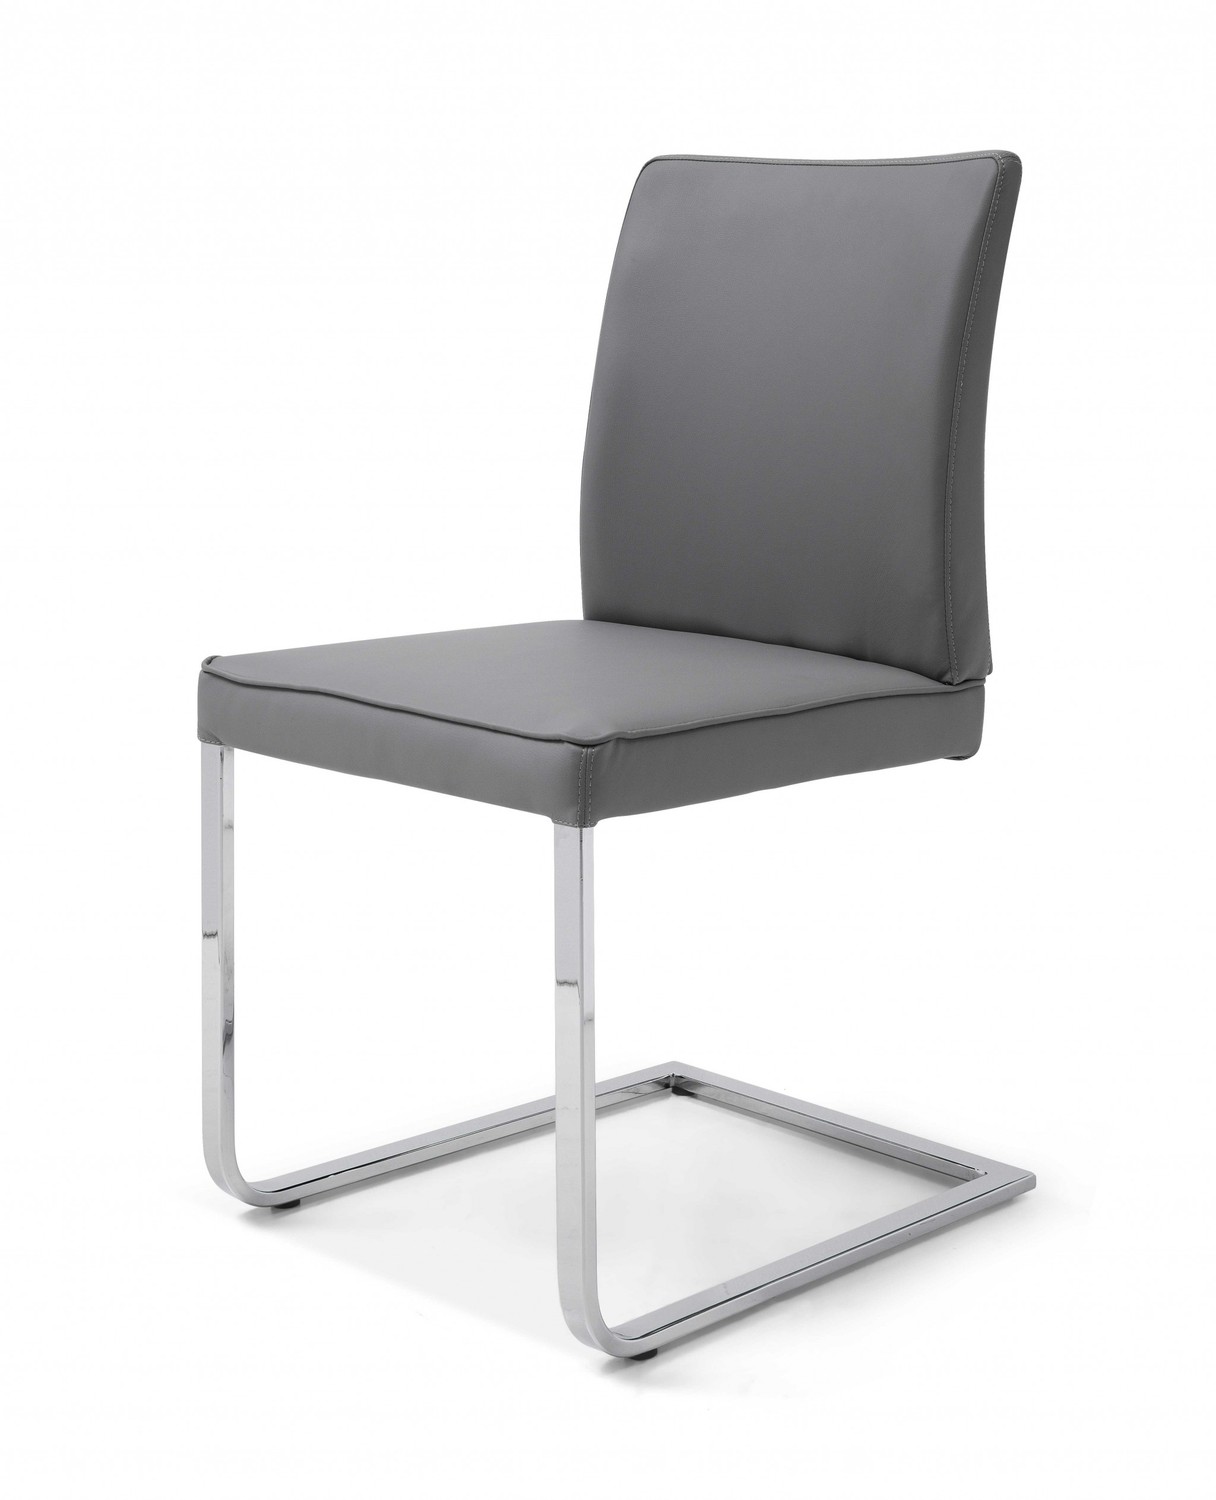 Gray Faux Leather and Chrome Dining Chair